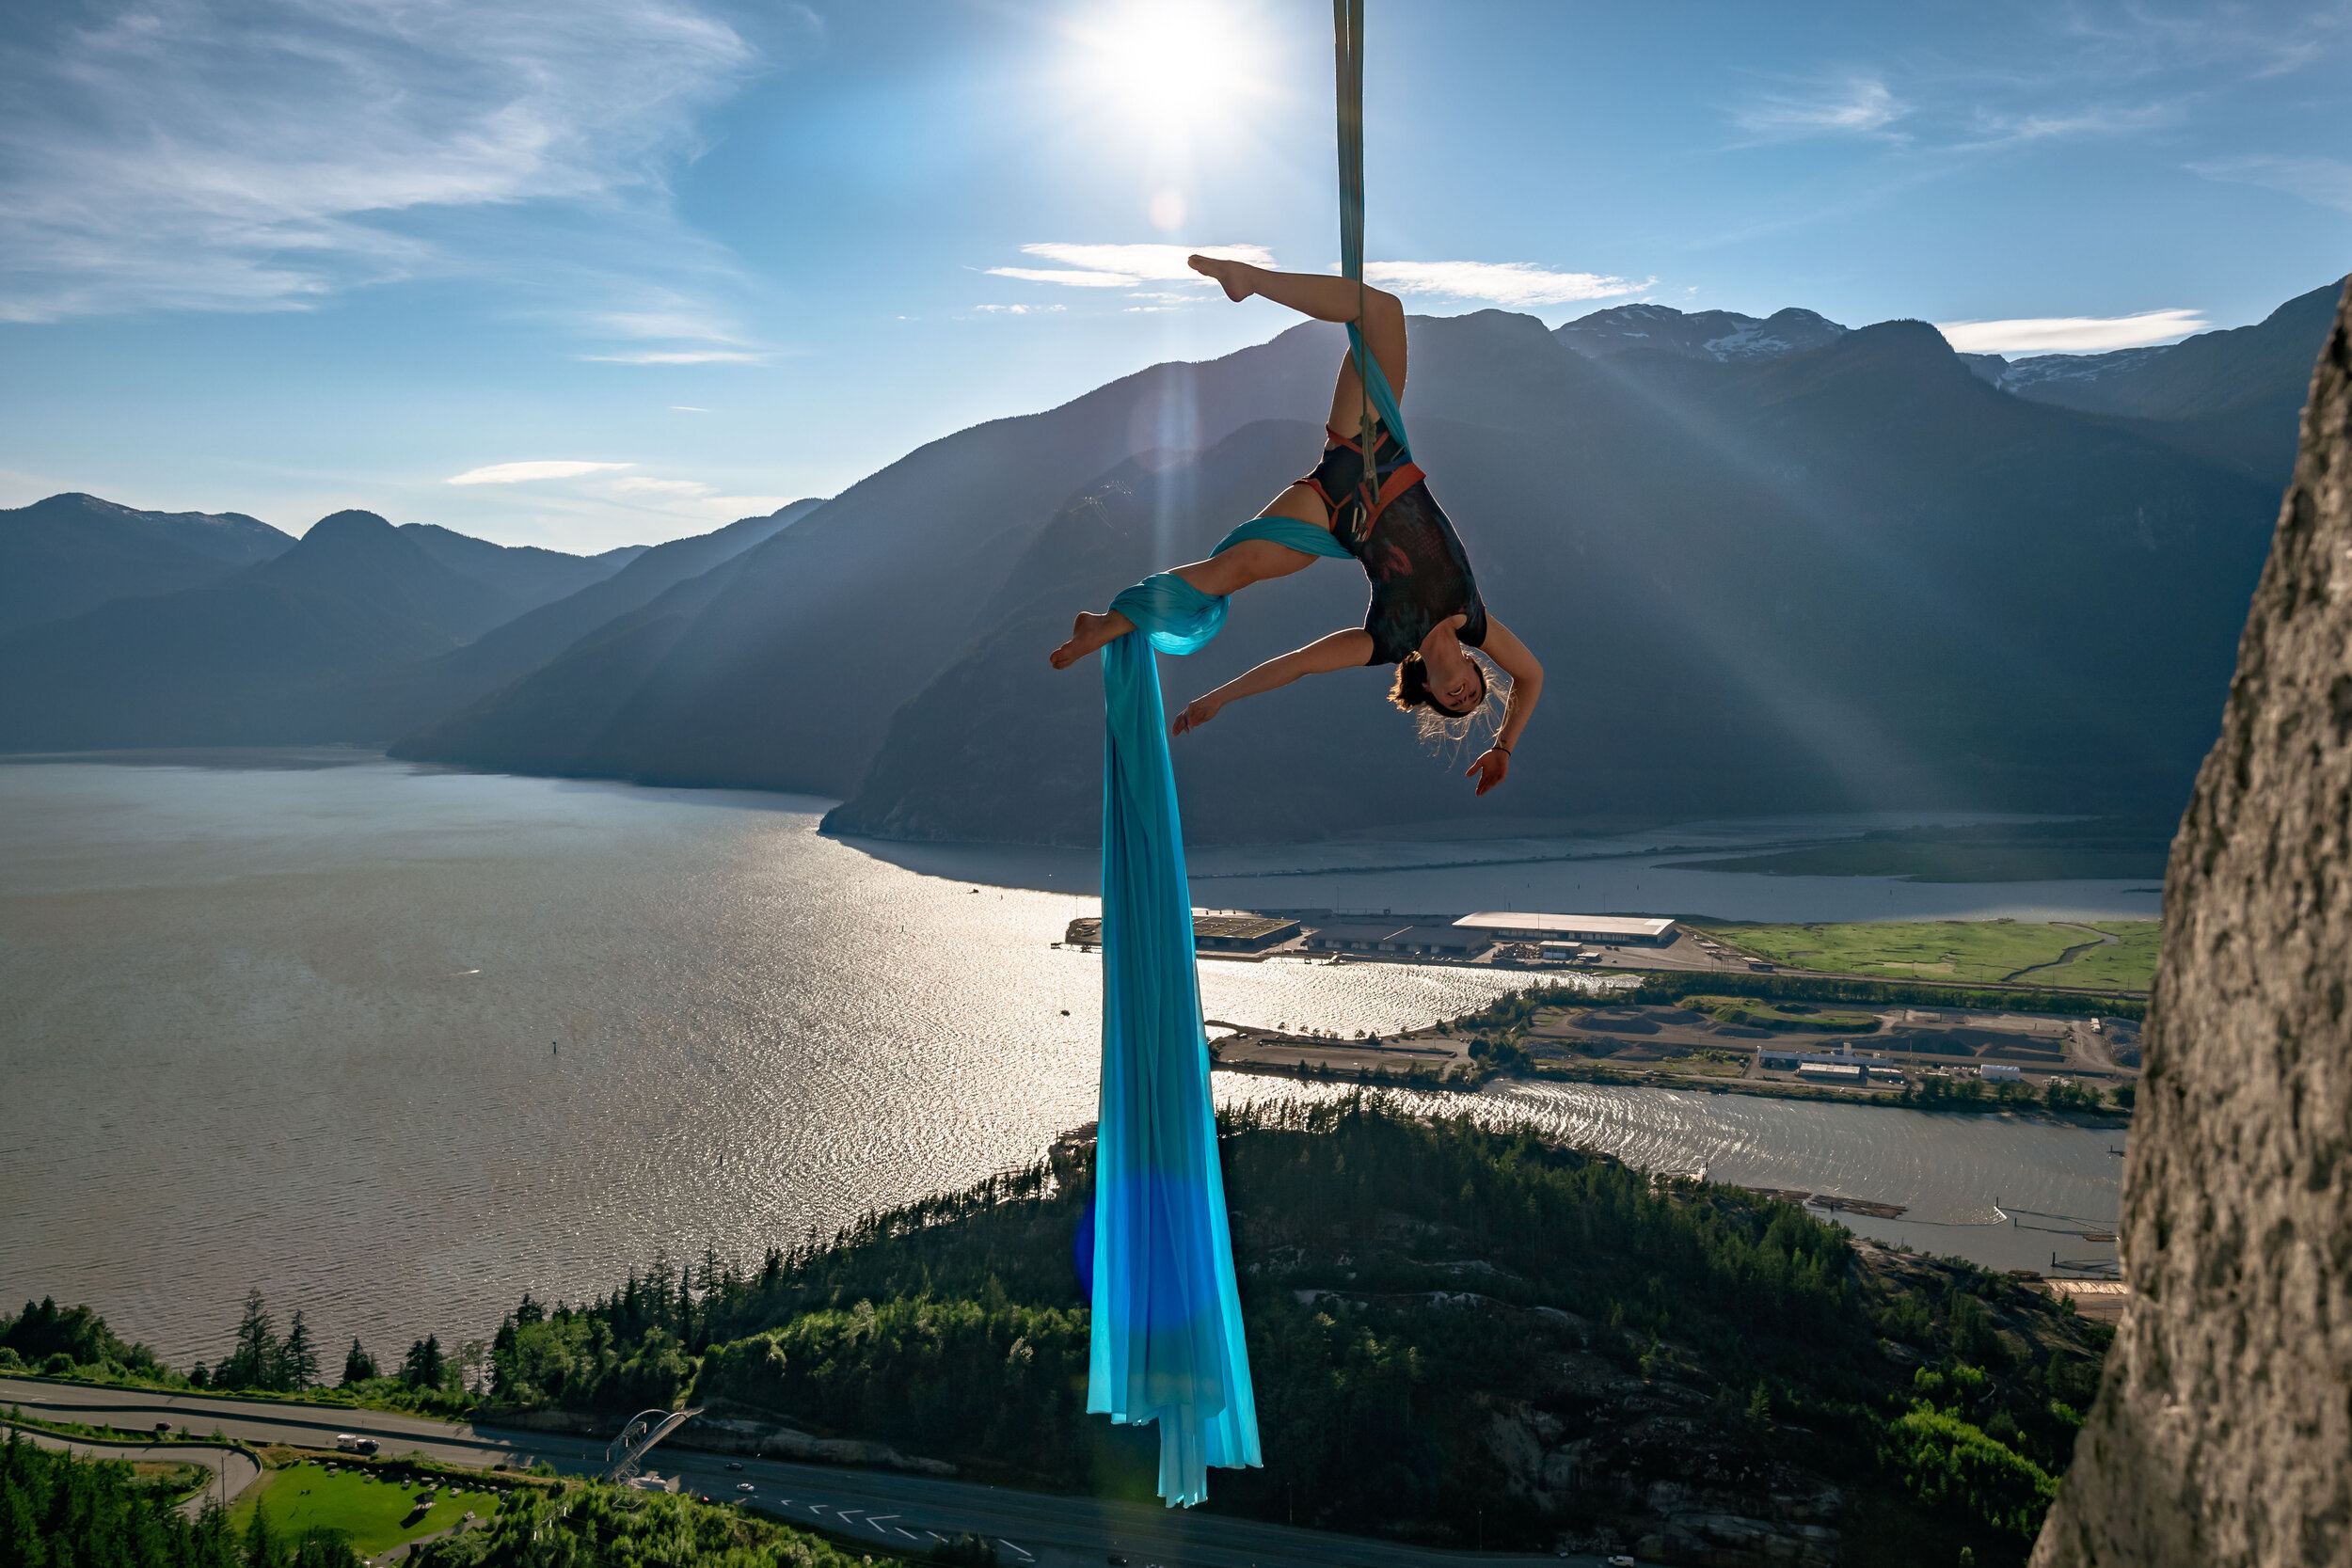 Aerial Silks: Extreme artistic performance with a fabric in the air, Acrobatics with no safety lines. 2500x1670 HD Background.